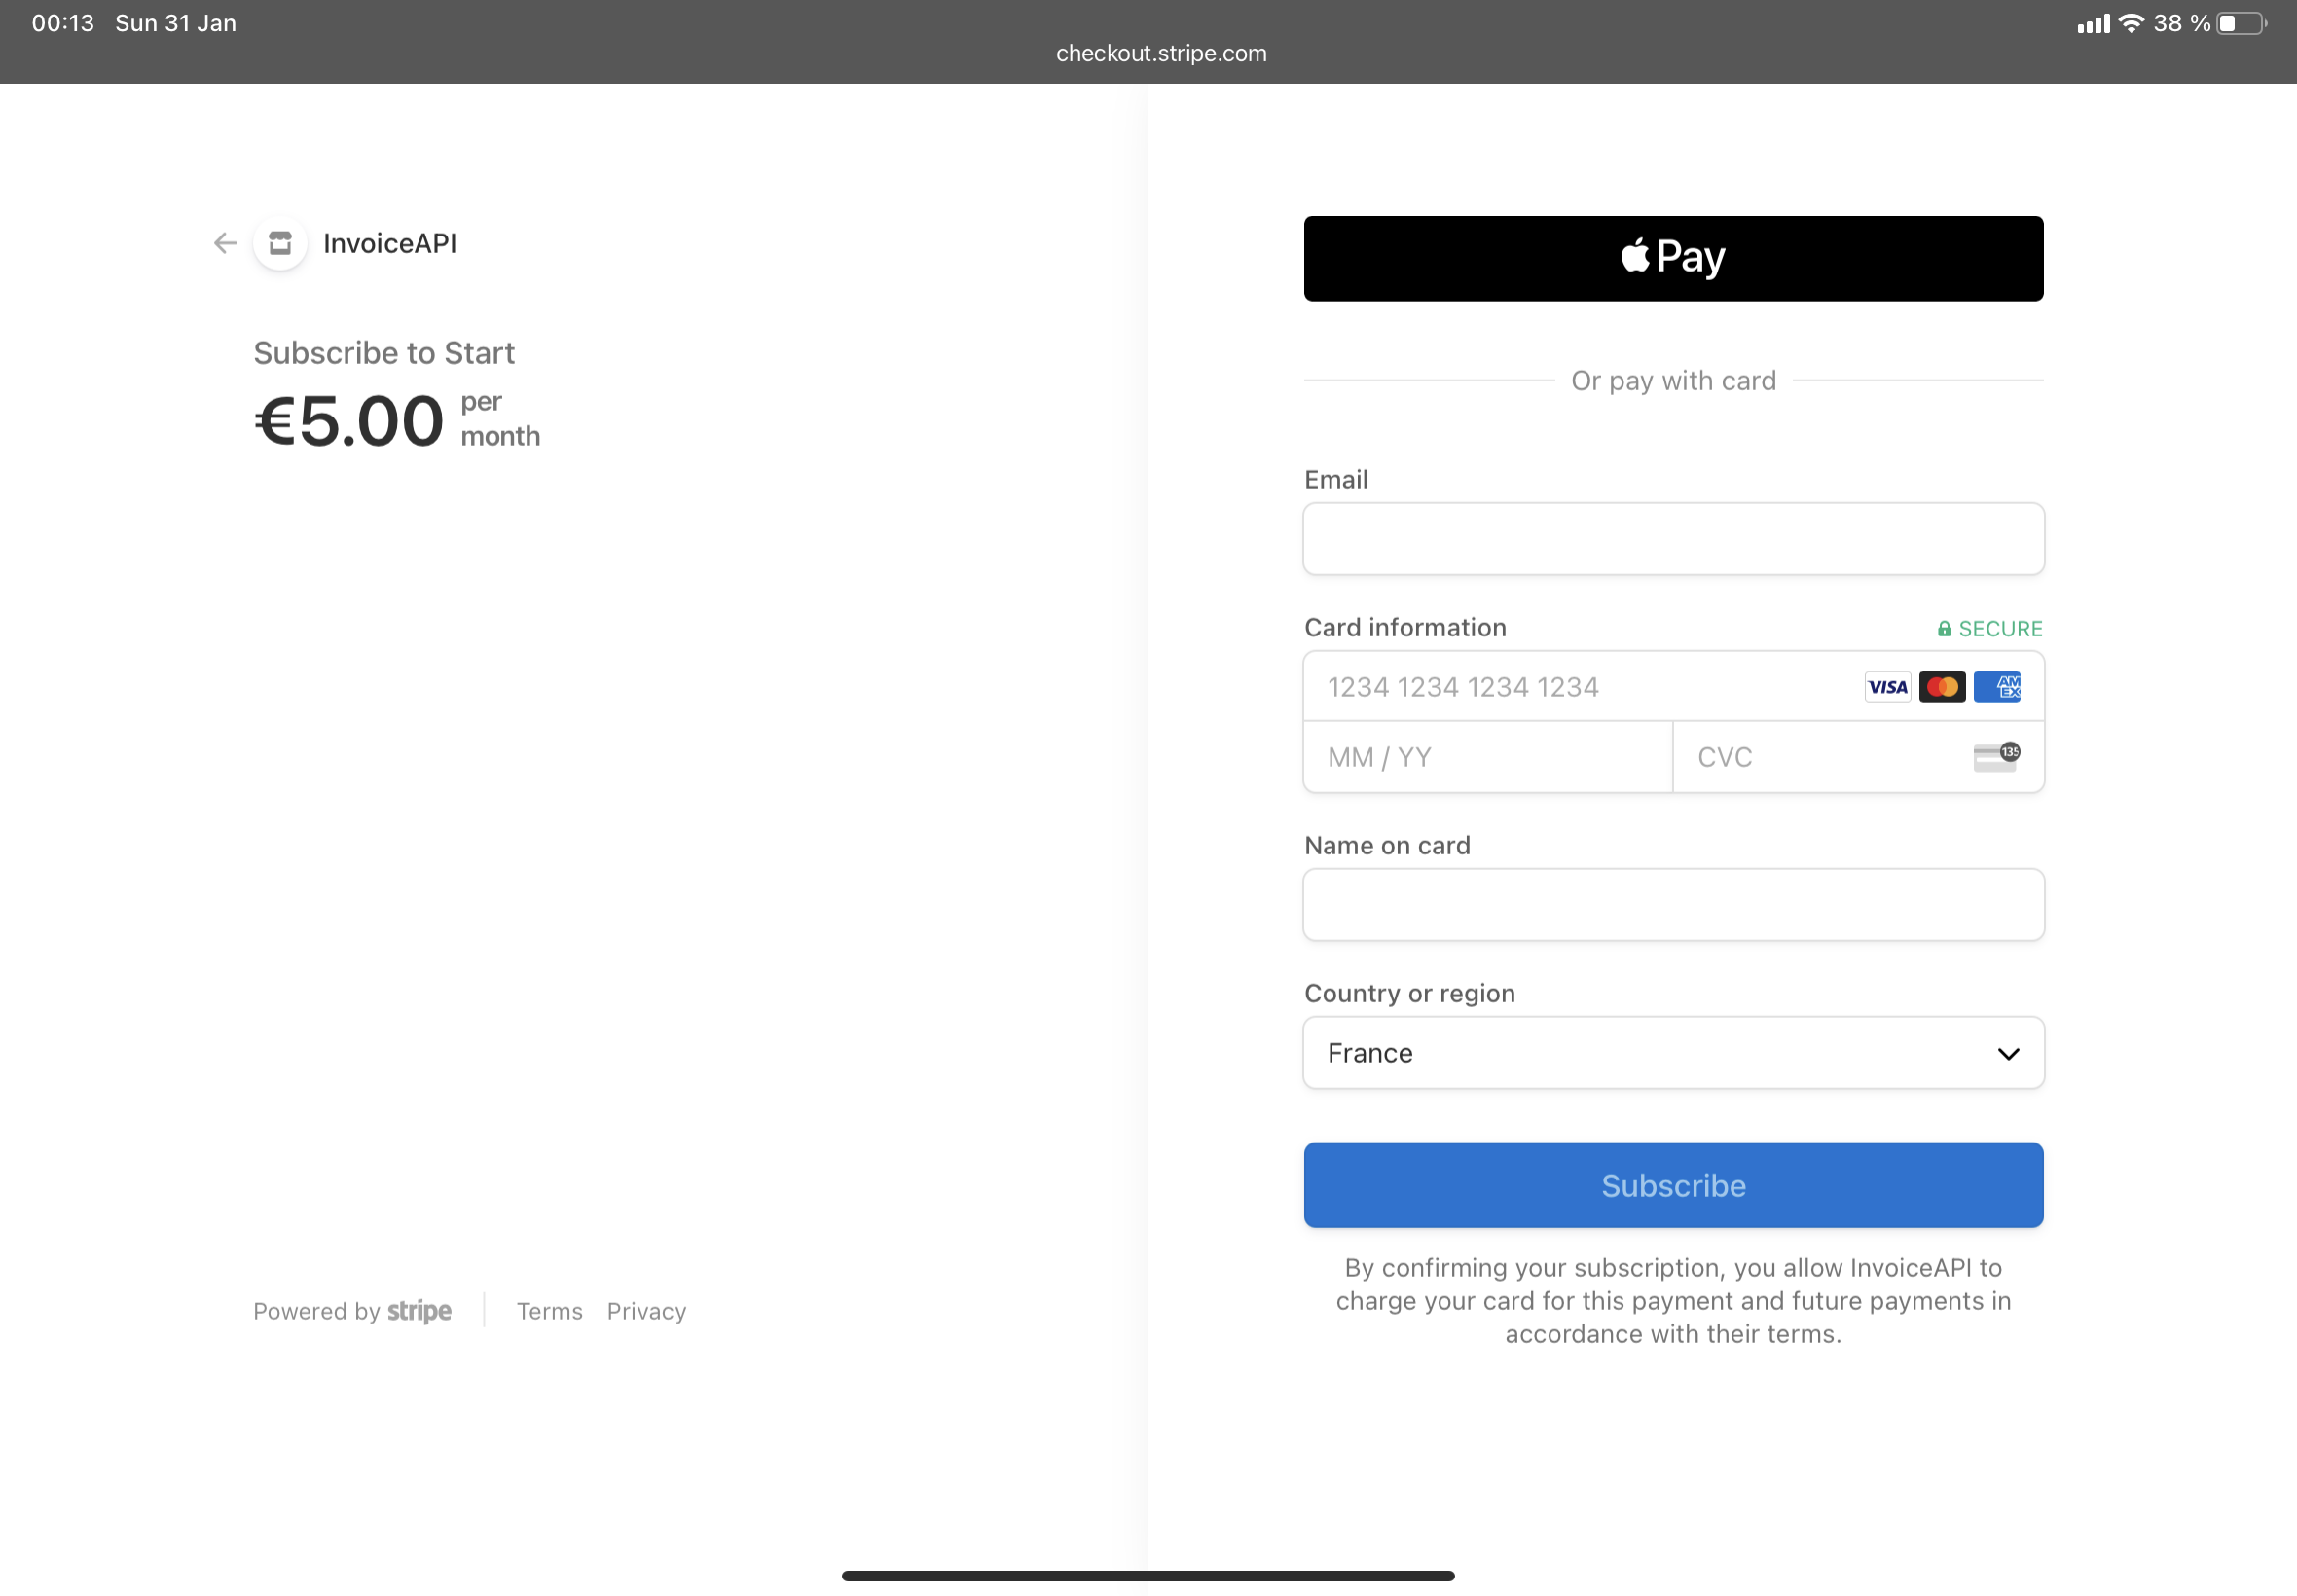 Stripe Checkout page, without writing a single line of server code!